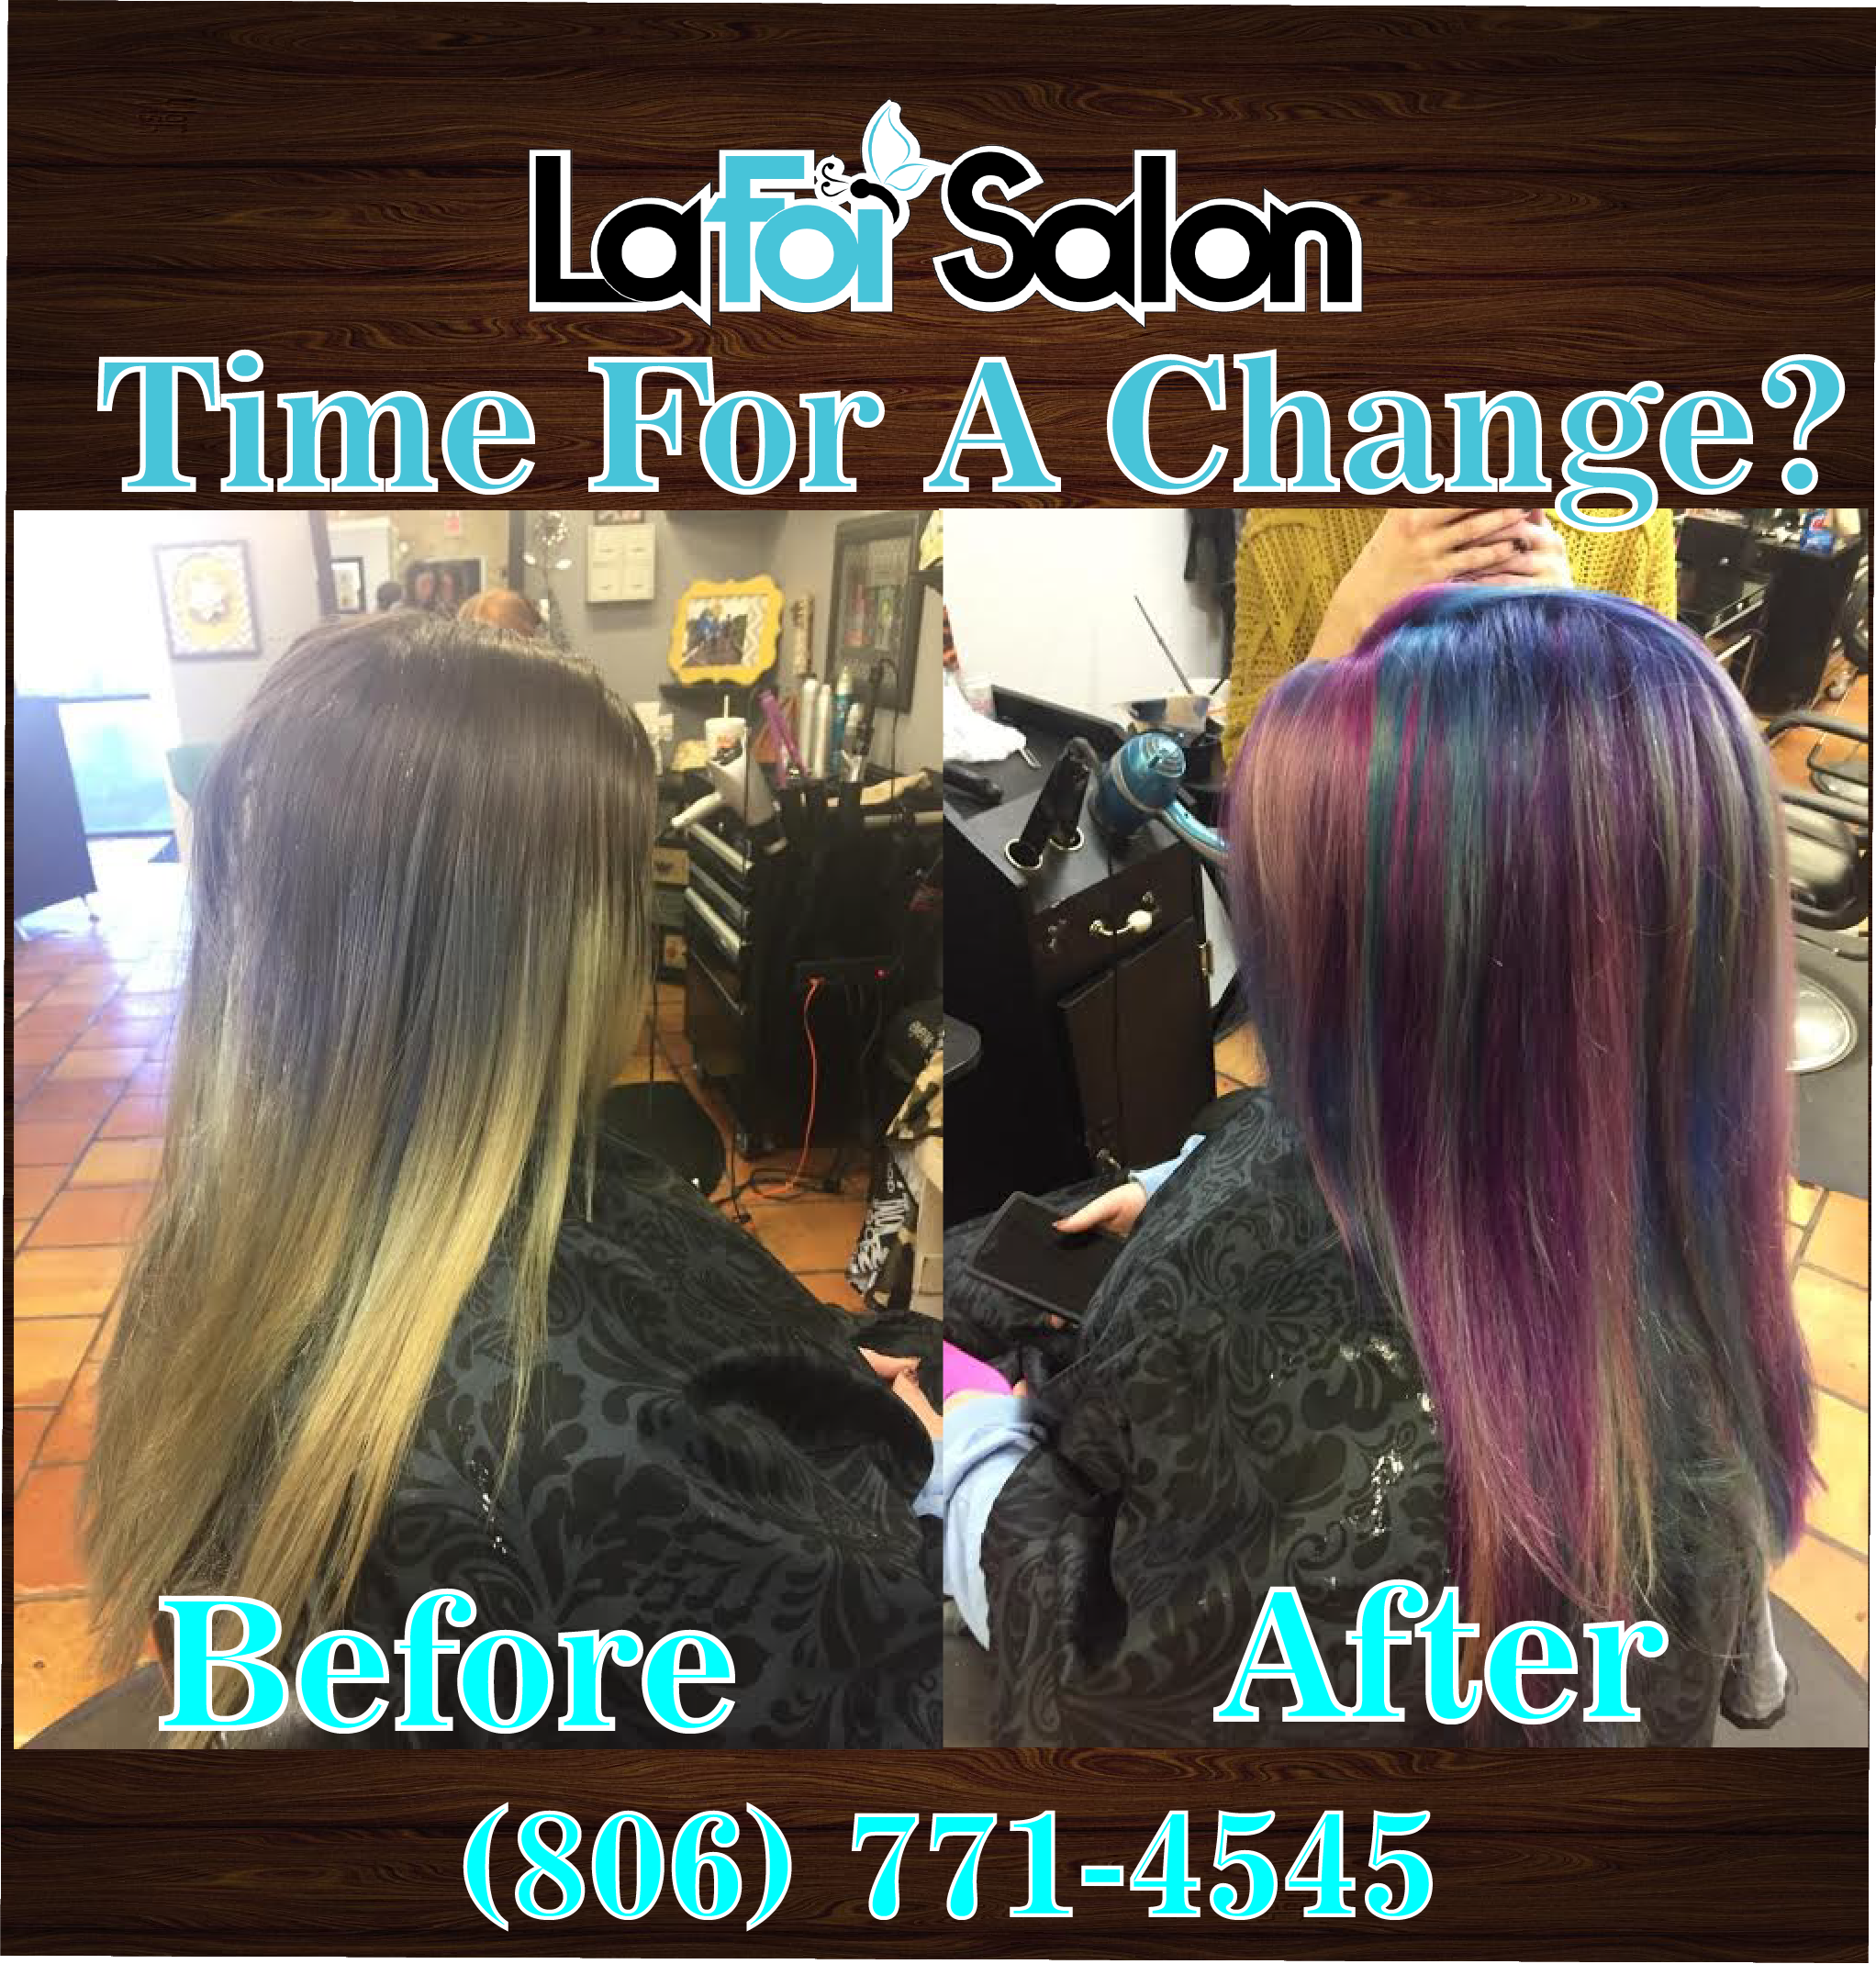 Whether It Be Time For A Change Or Wanting To Keep Your Hair The Same Call Us Today To Book Your Next Hair Appoinment! www.lafoisalon.com https://goo.gl/znluXJ